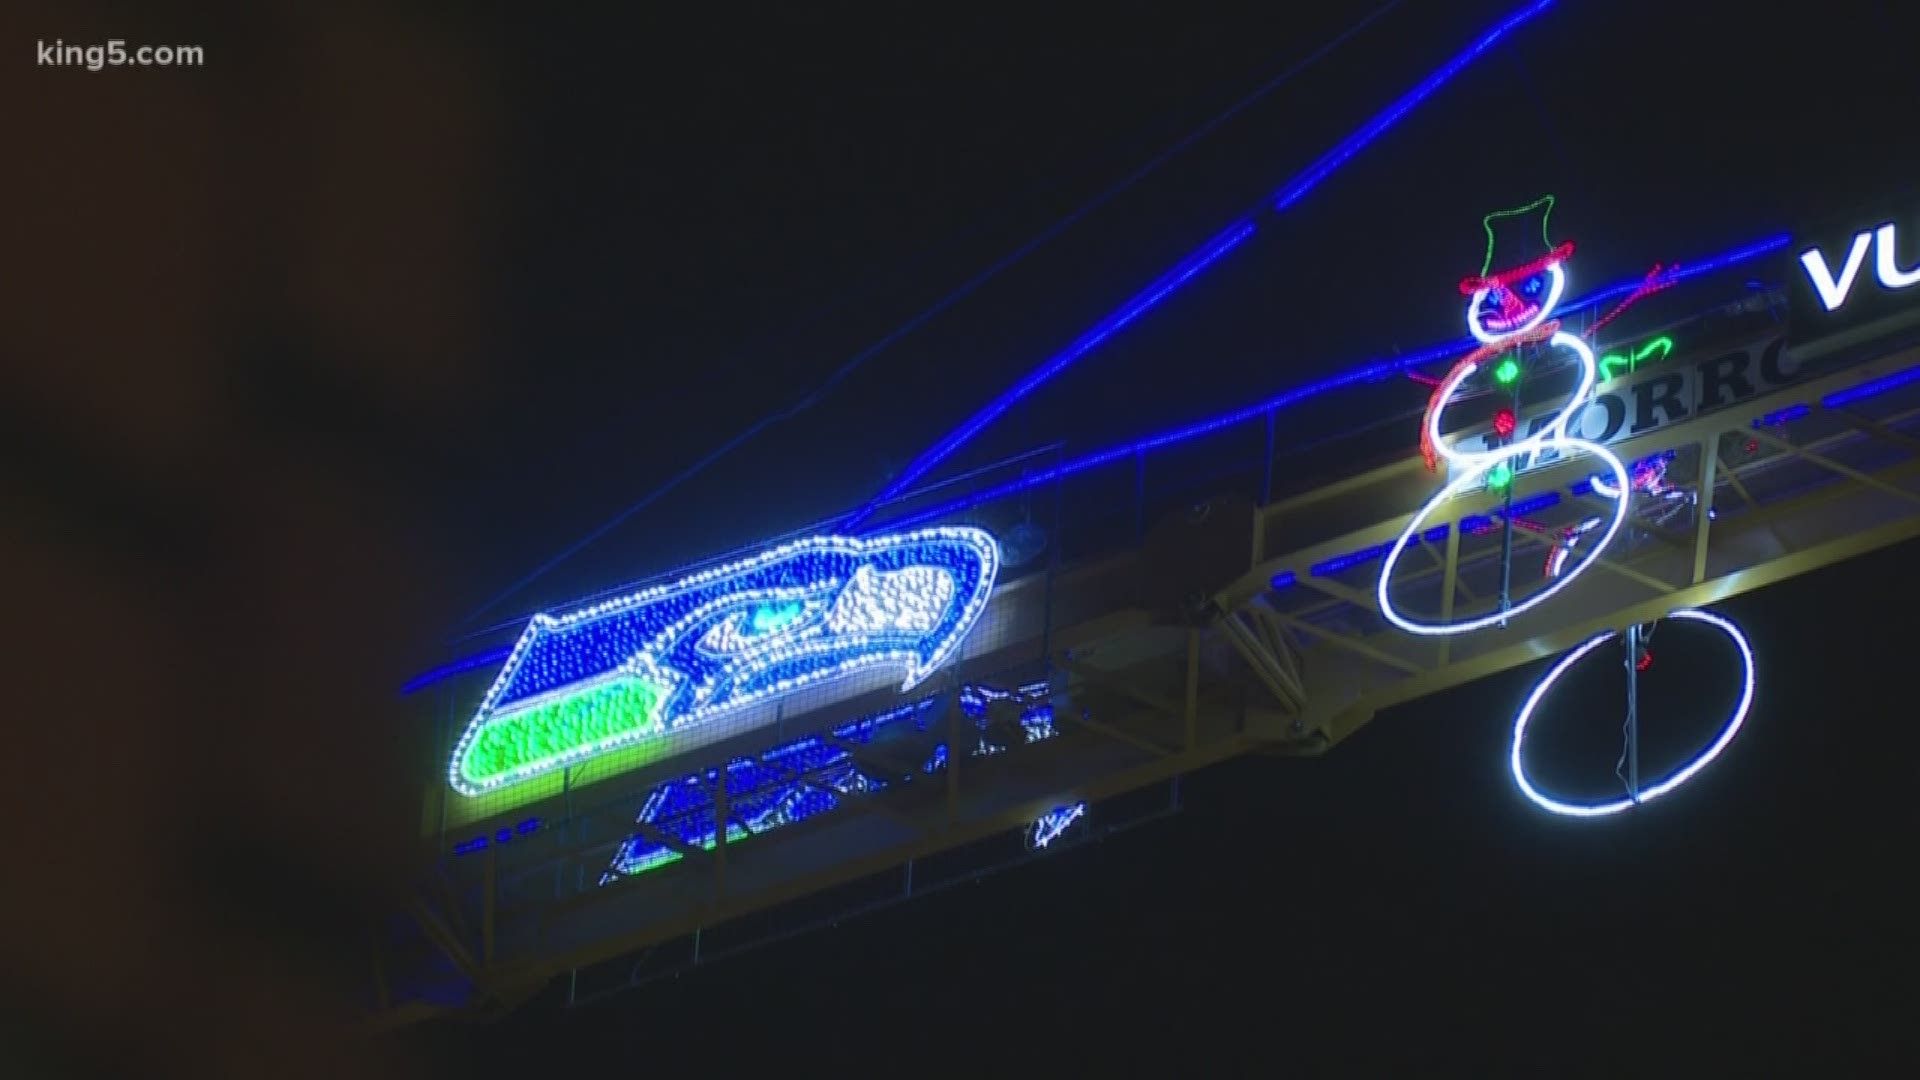 How they put Christmas lights on Seattle cranes